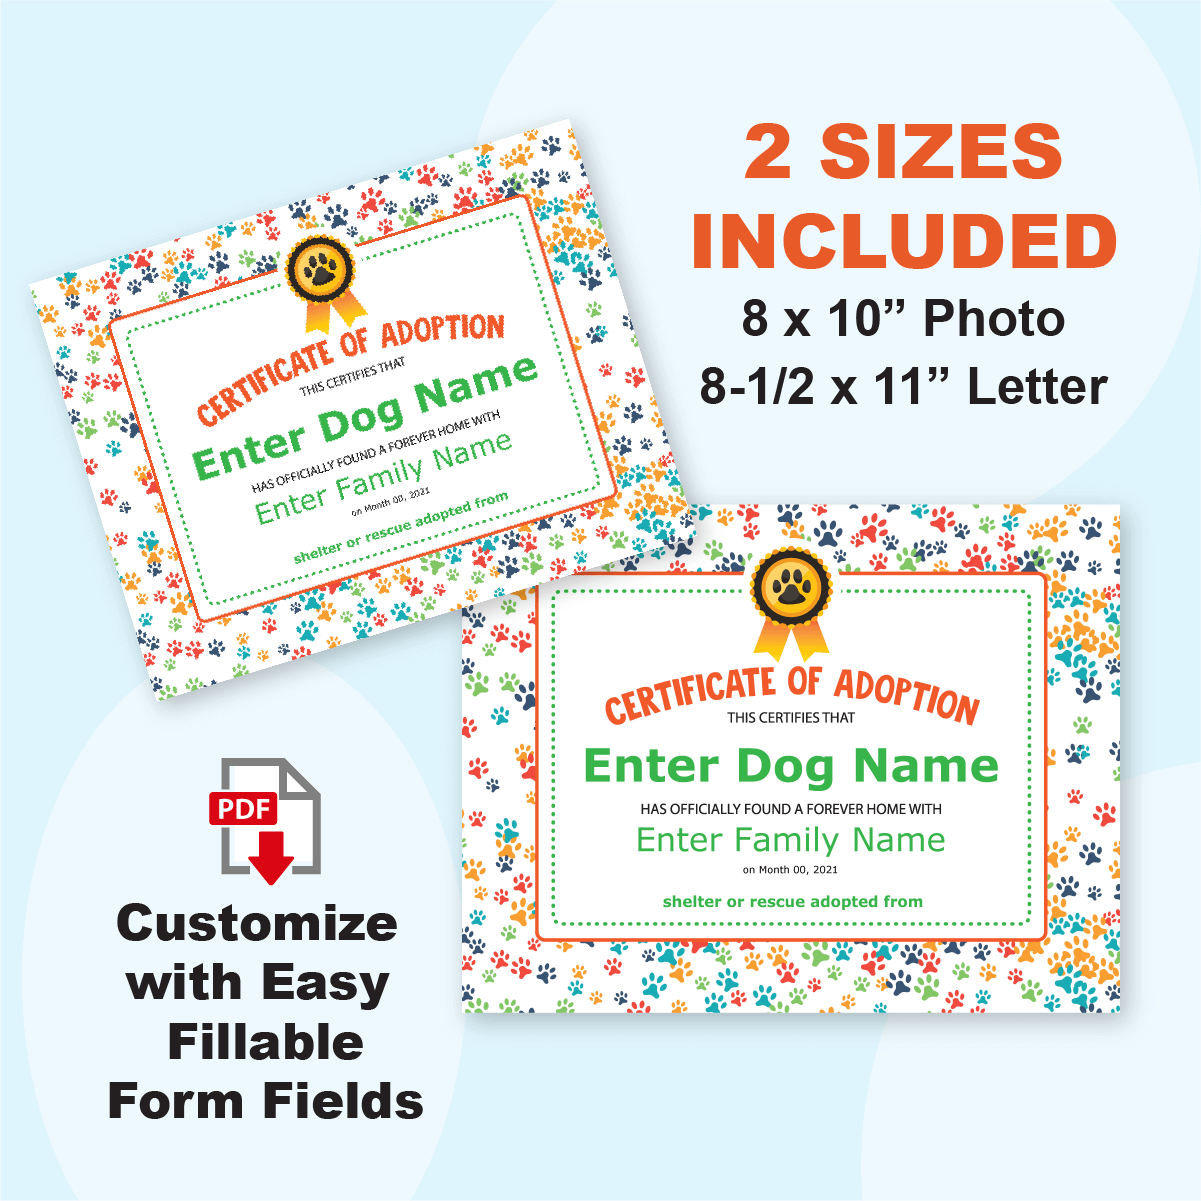 Dog Adoption Certificate Printable in two sizes, 8x10 and letter